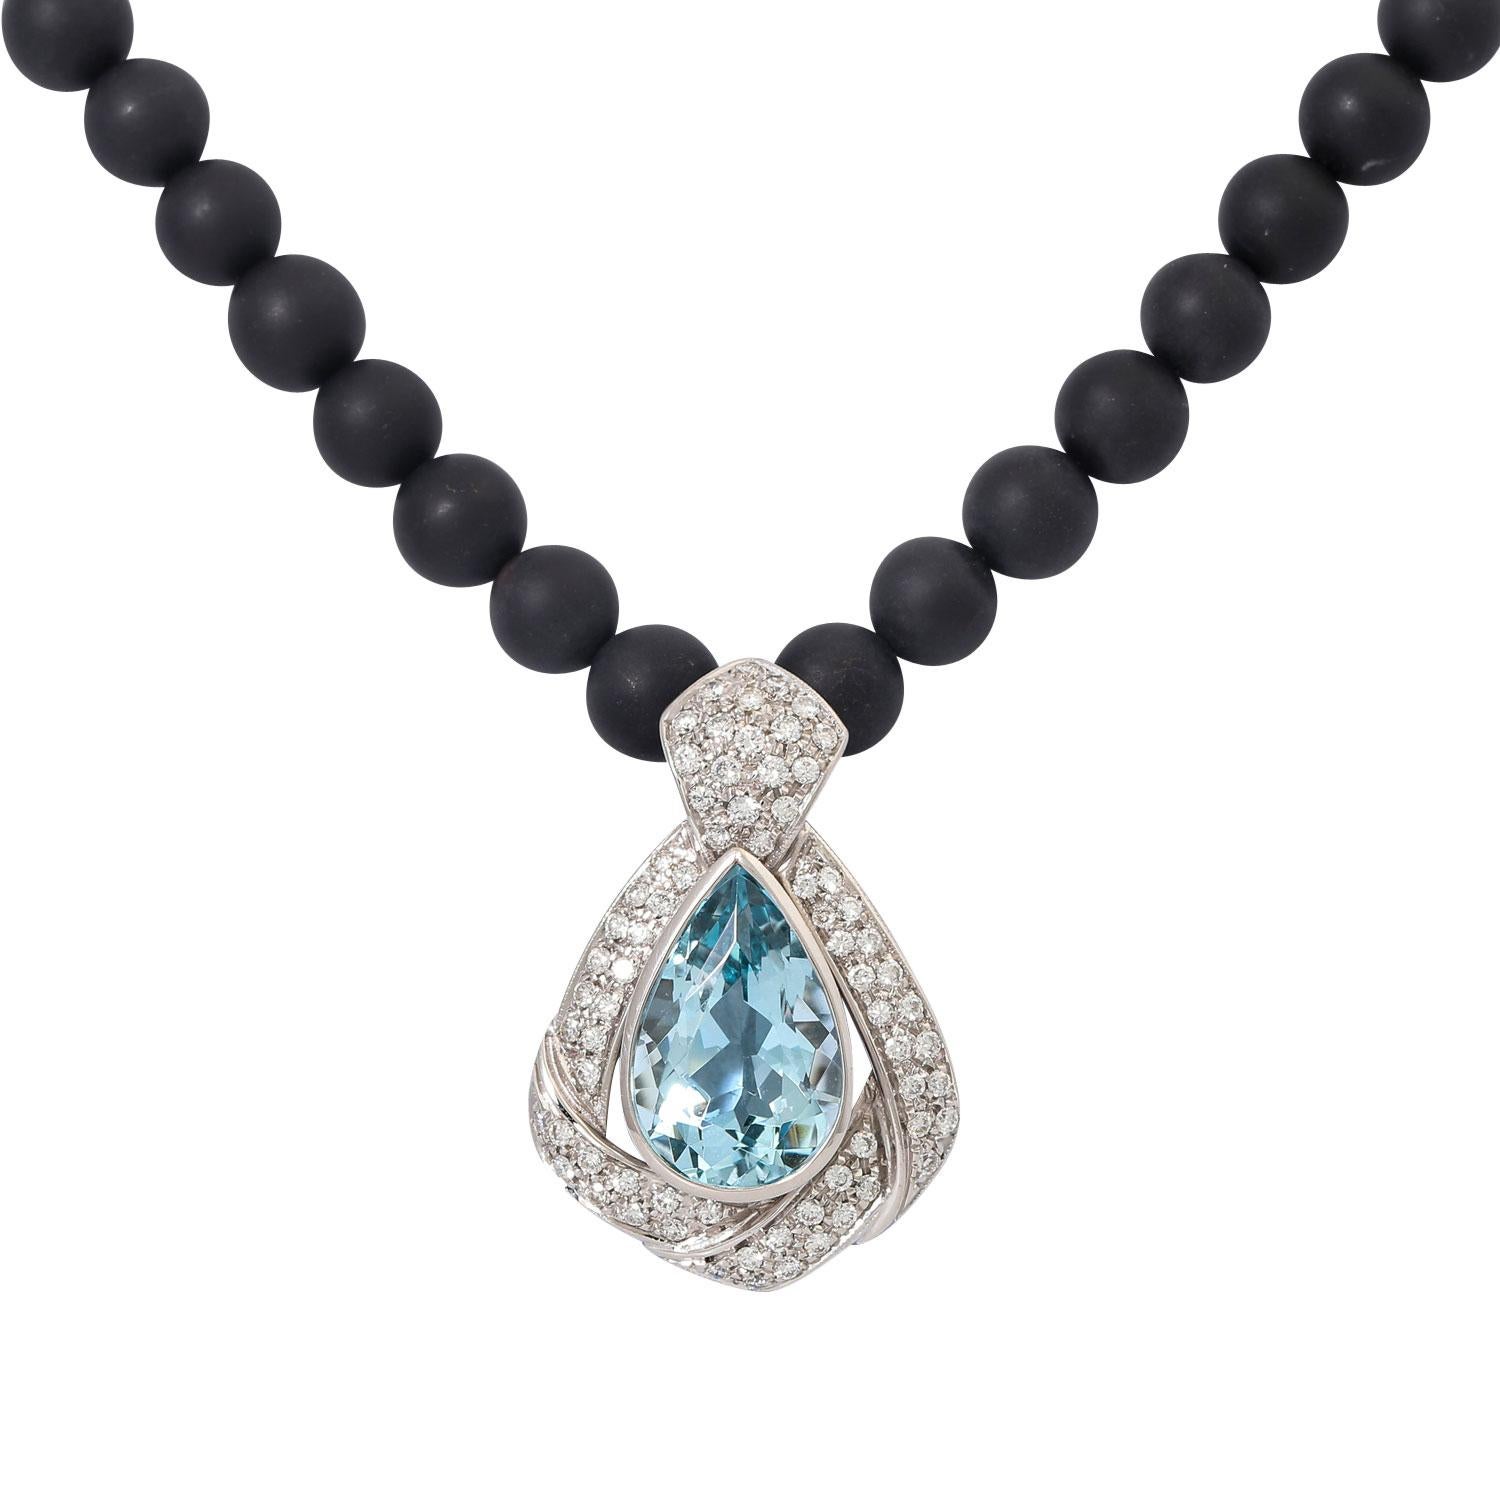 From together approx. 1.5 ct, good color and purity, wg 18k, chain with onyx balls, total 41.7 gr, chain length approx. 45 cm, earring length approx. 3.5 cm, 21st century, Light traces of carrying, collier of the middle part.

 Set Necklace and Ear